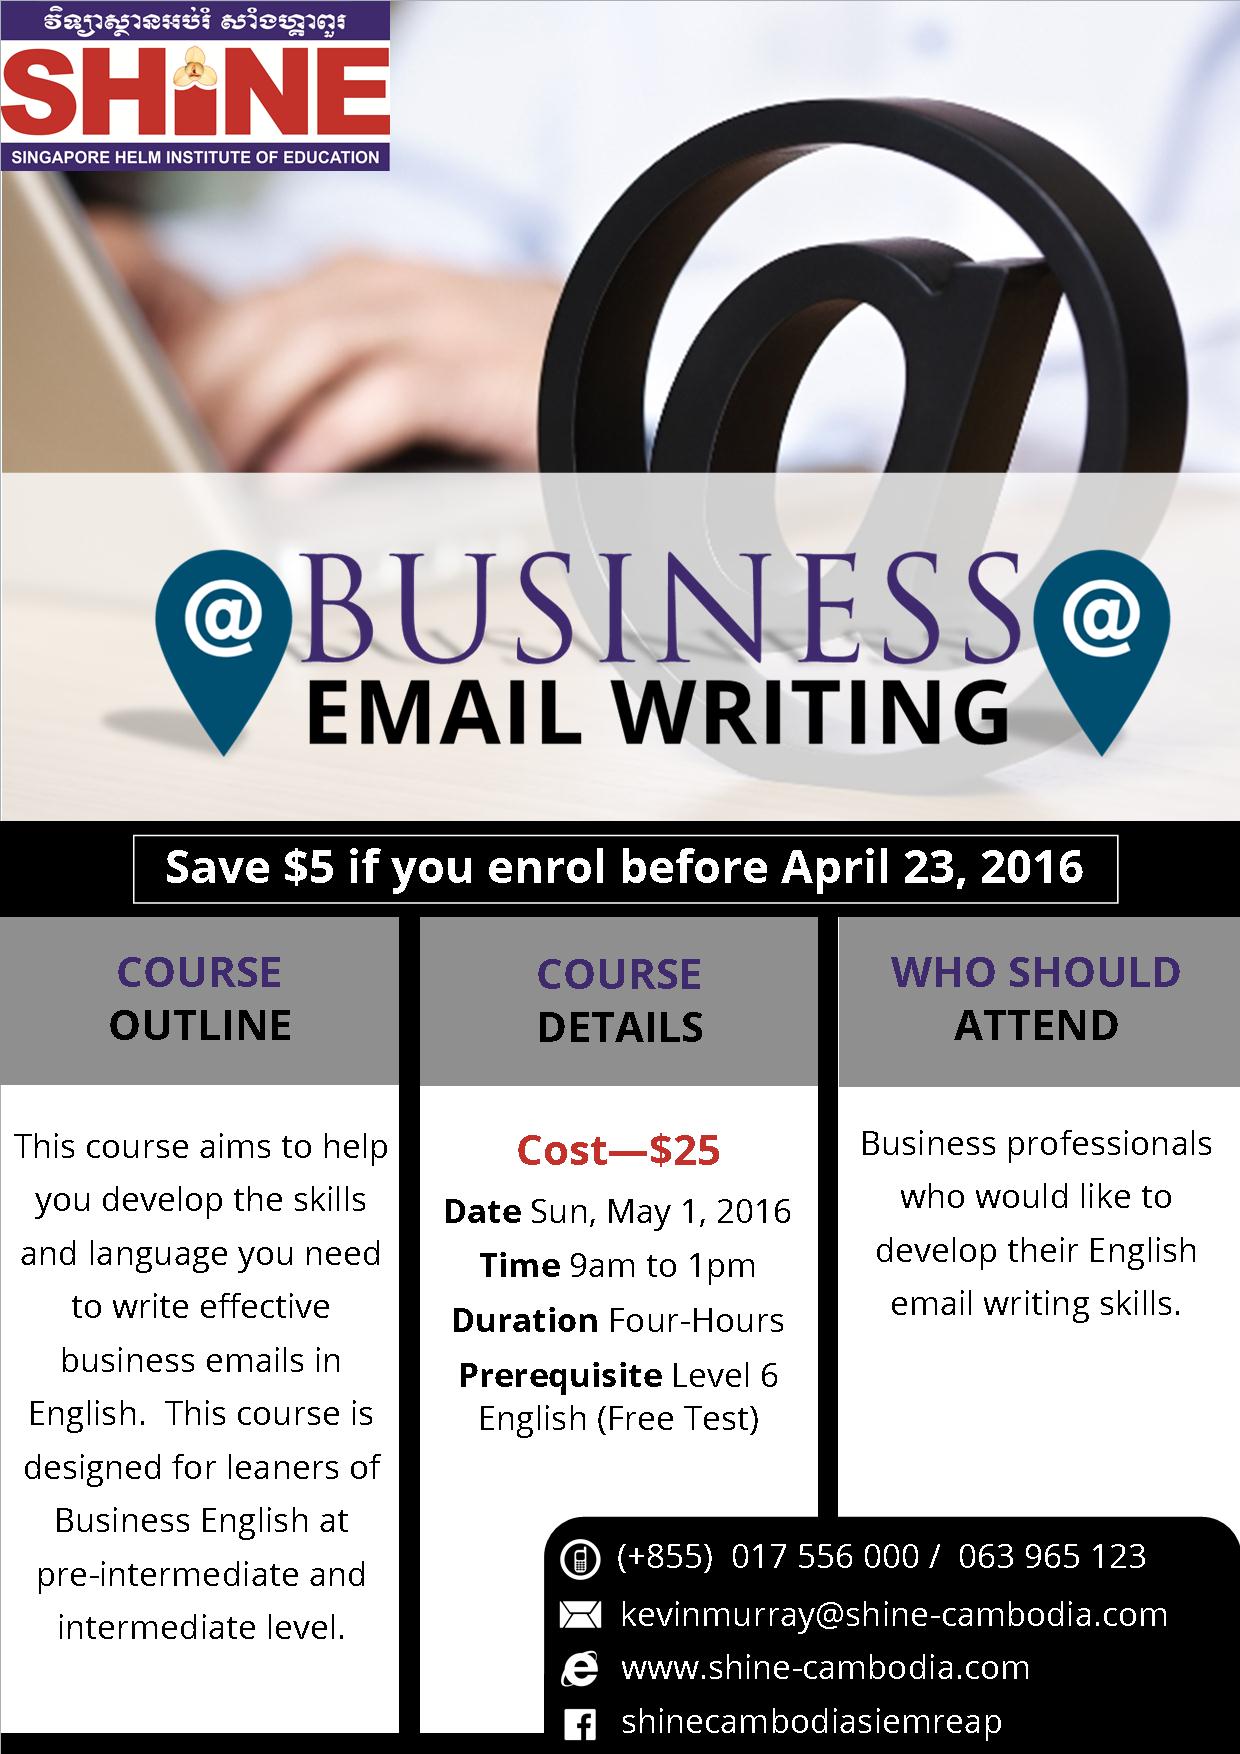 SHINE FLYER-Business Email Writing.jpg